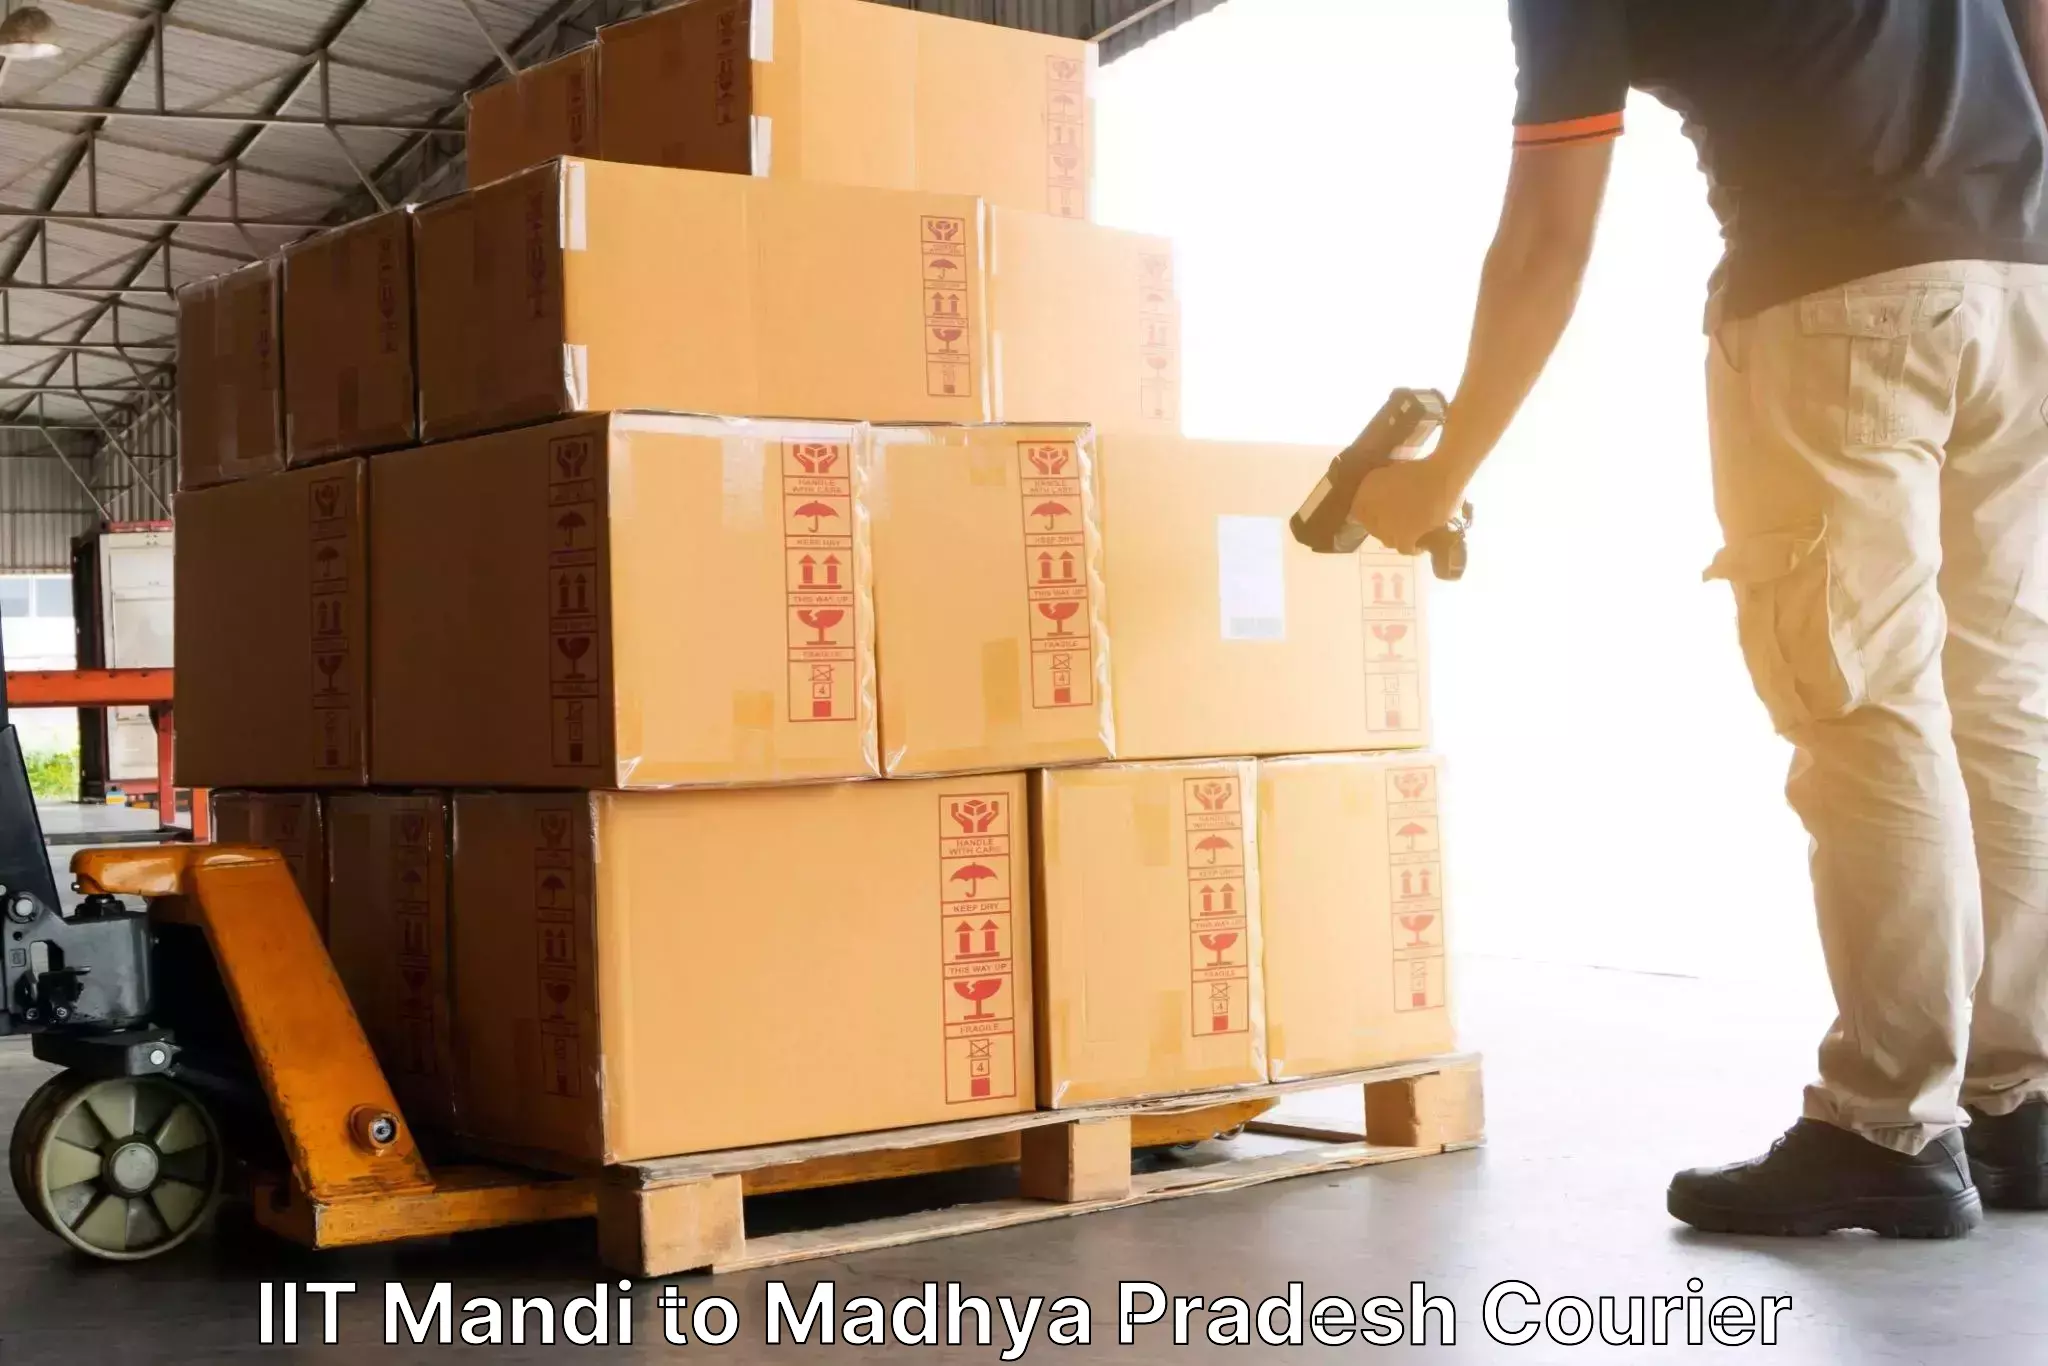 24/7 courier service IIT Mandi to Sausar